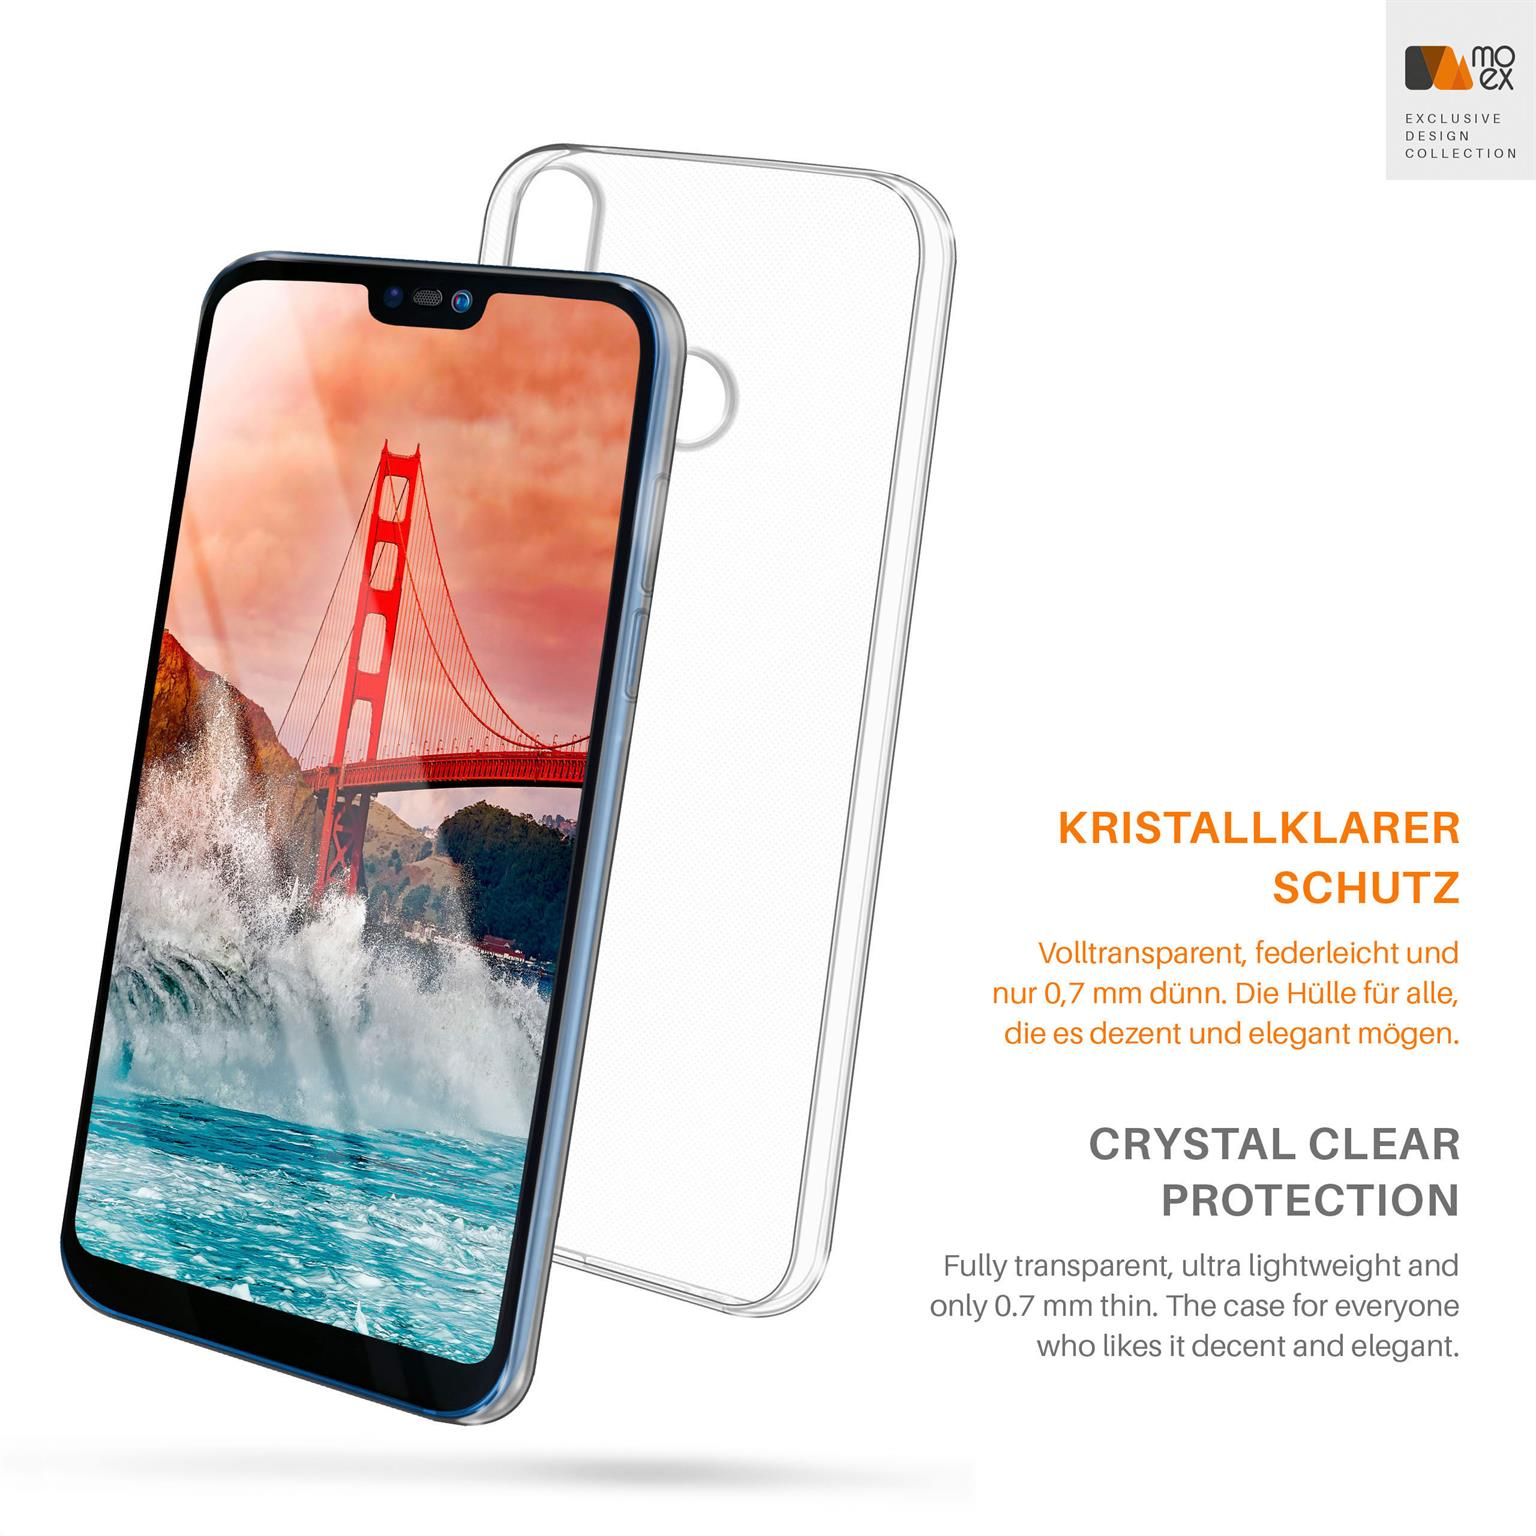 Honor Huawei, Case, MOEX 8X, Aero Backcover, Crystal-Clear